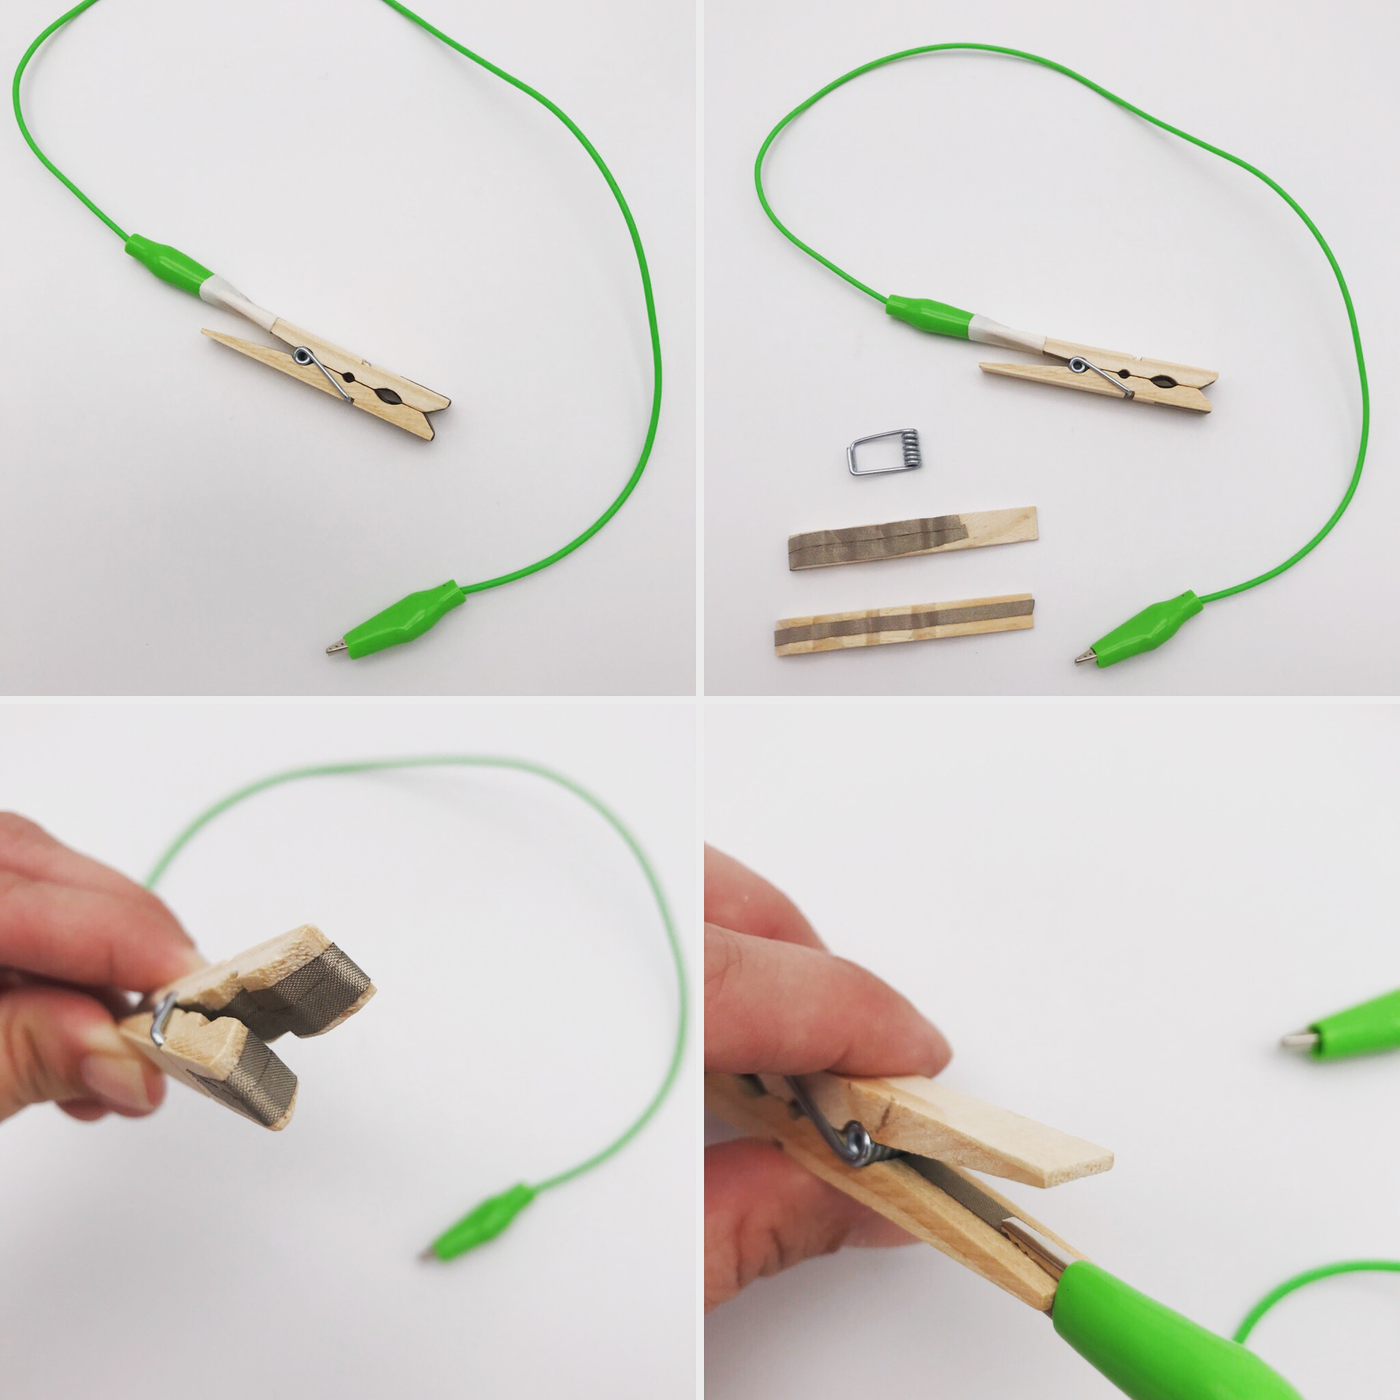 Kid Friendly Alligator Clips and Conductivity Game